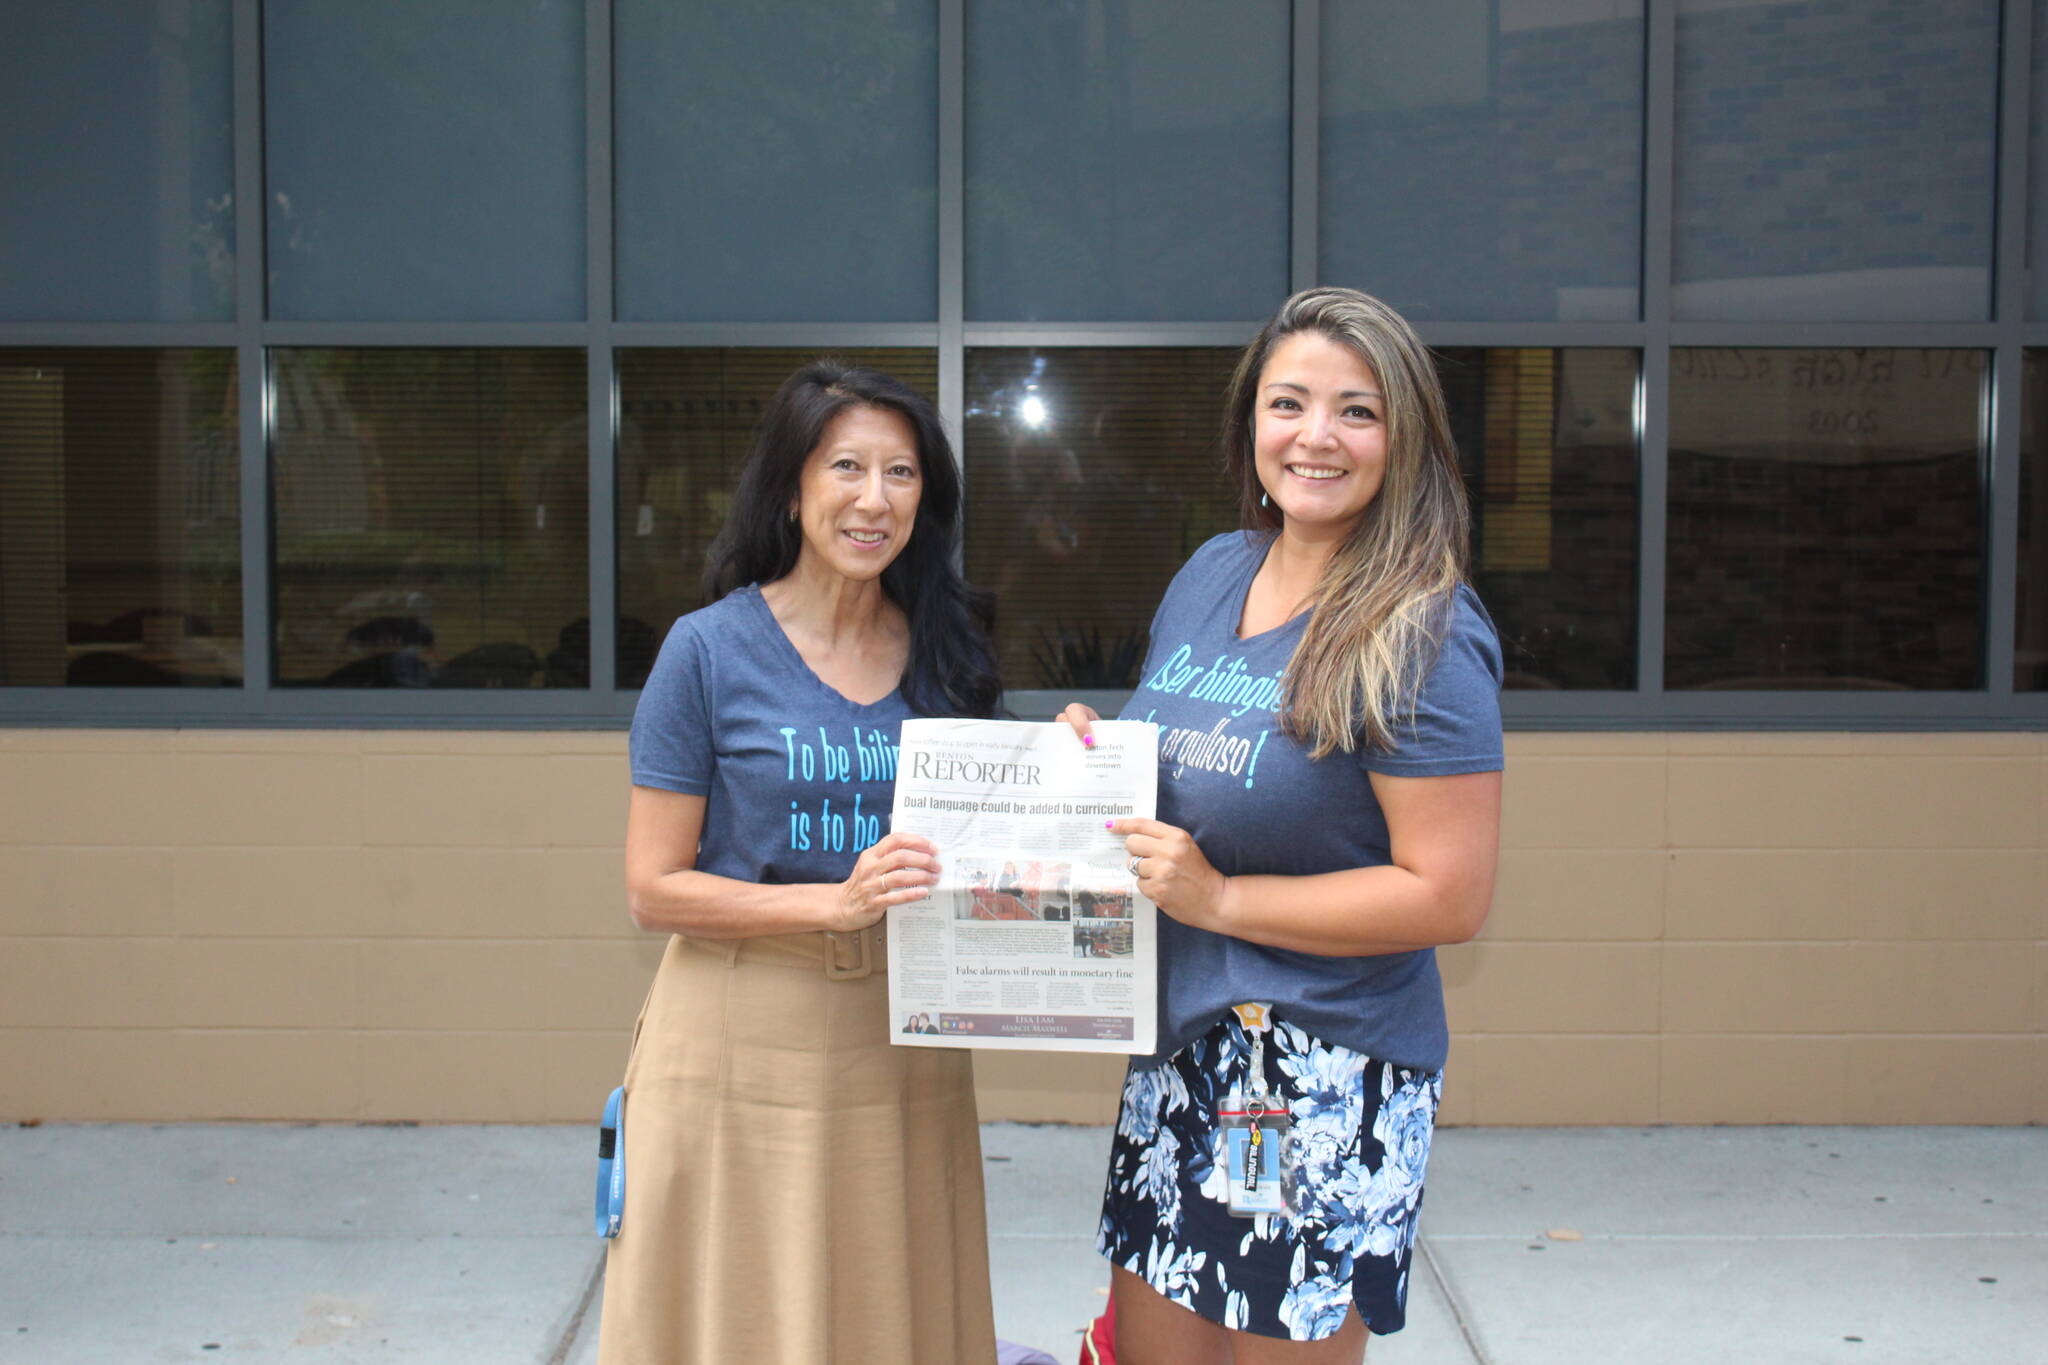 Photo by Annika Hauer/For the Reporter 
Linda Hoste, left, and Norma Taylor, right, holding a 2018 issue of the Renton Reporter.